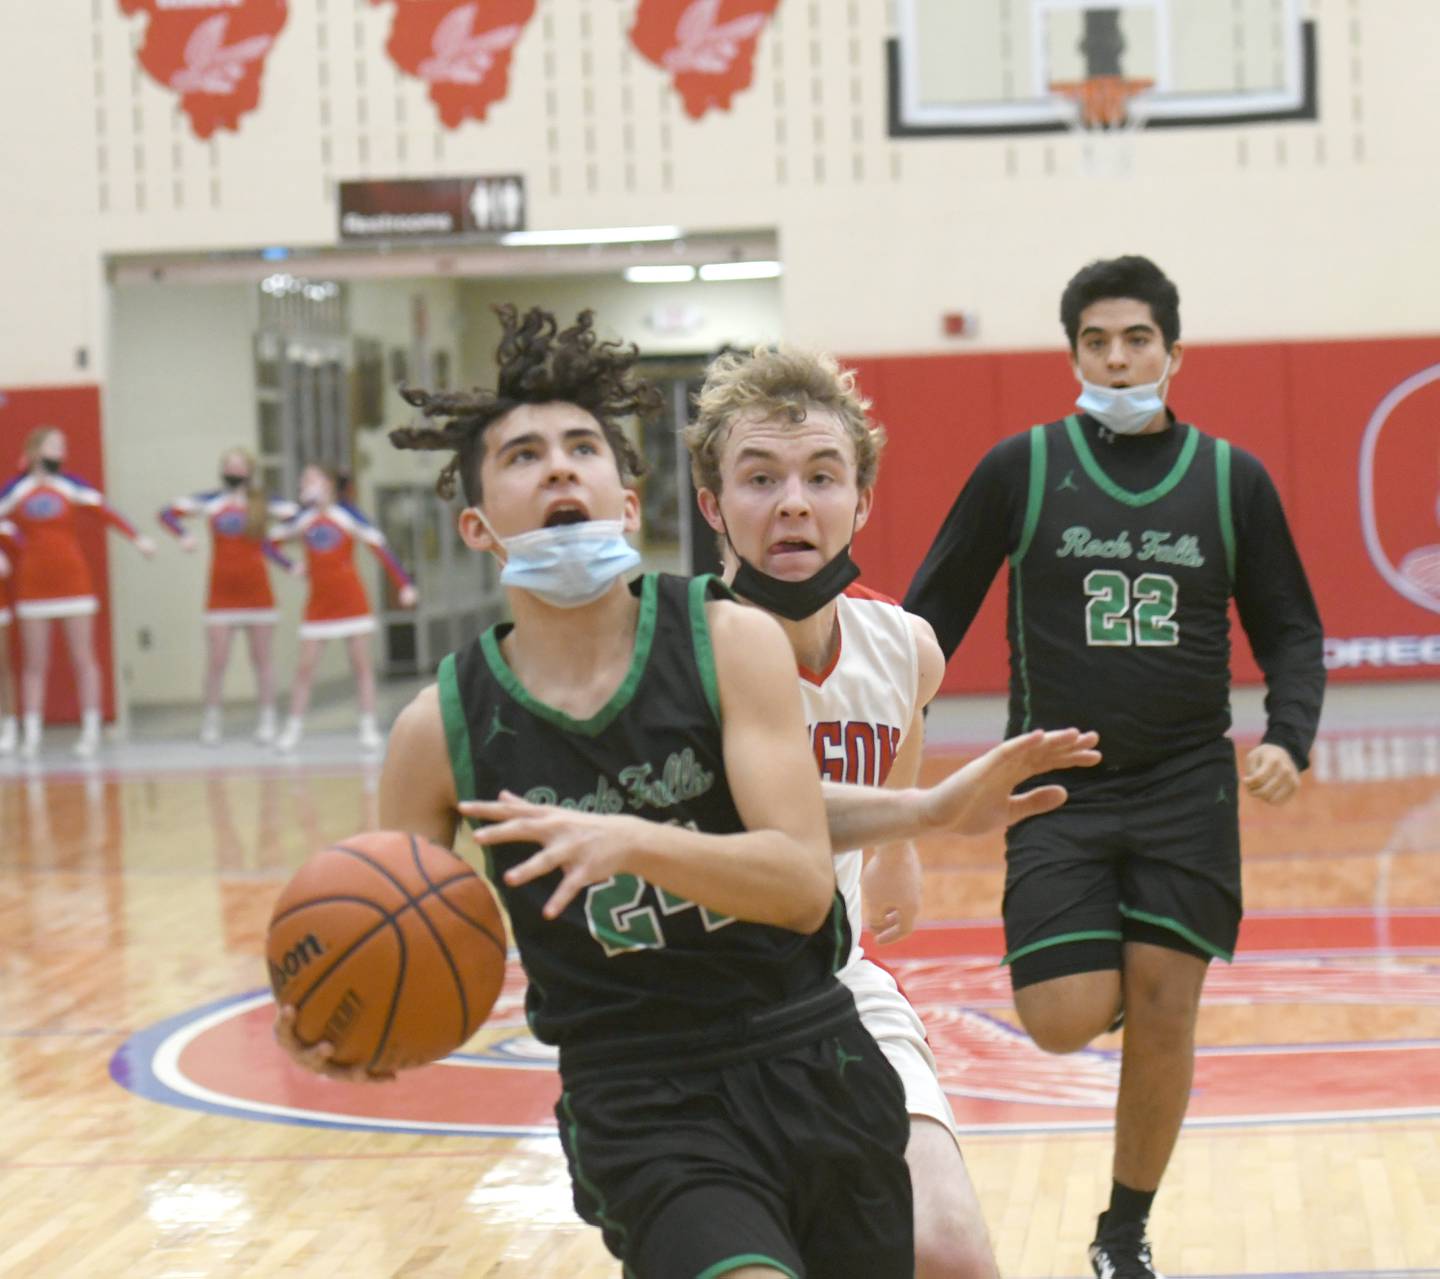 Rock Falls' Austin Castaneda drives to the basket as Oregon's Issac Reber tries to catch him during Friday action at the Blackhawk Center in Oregon.